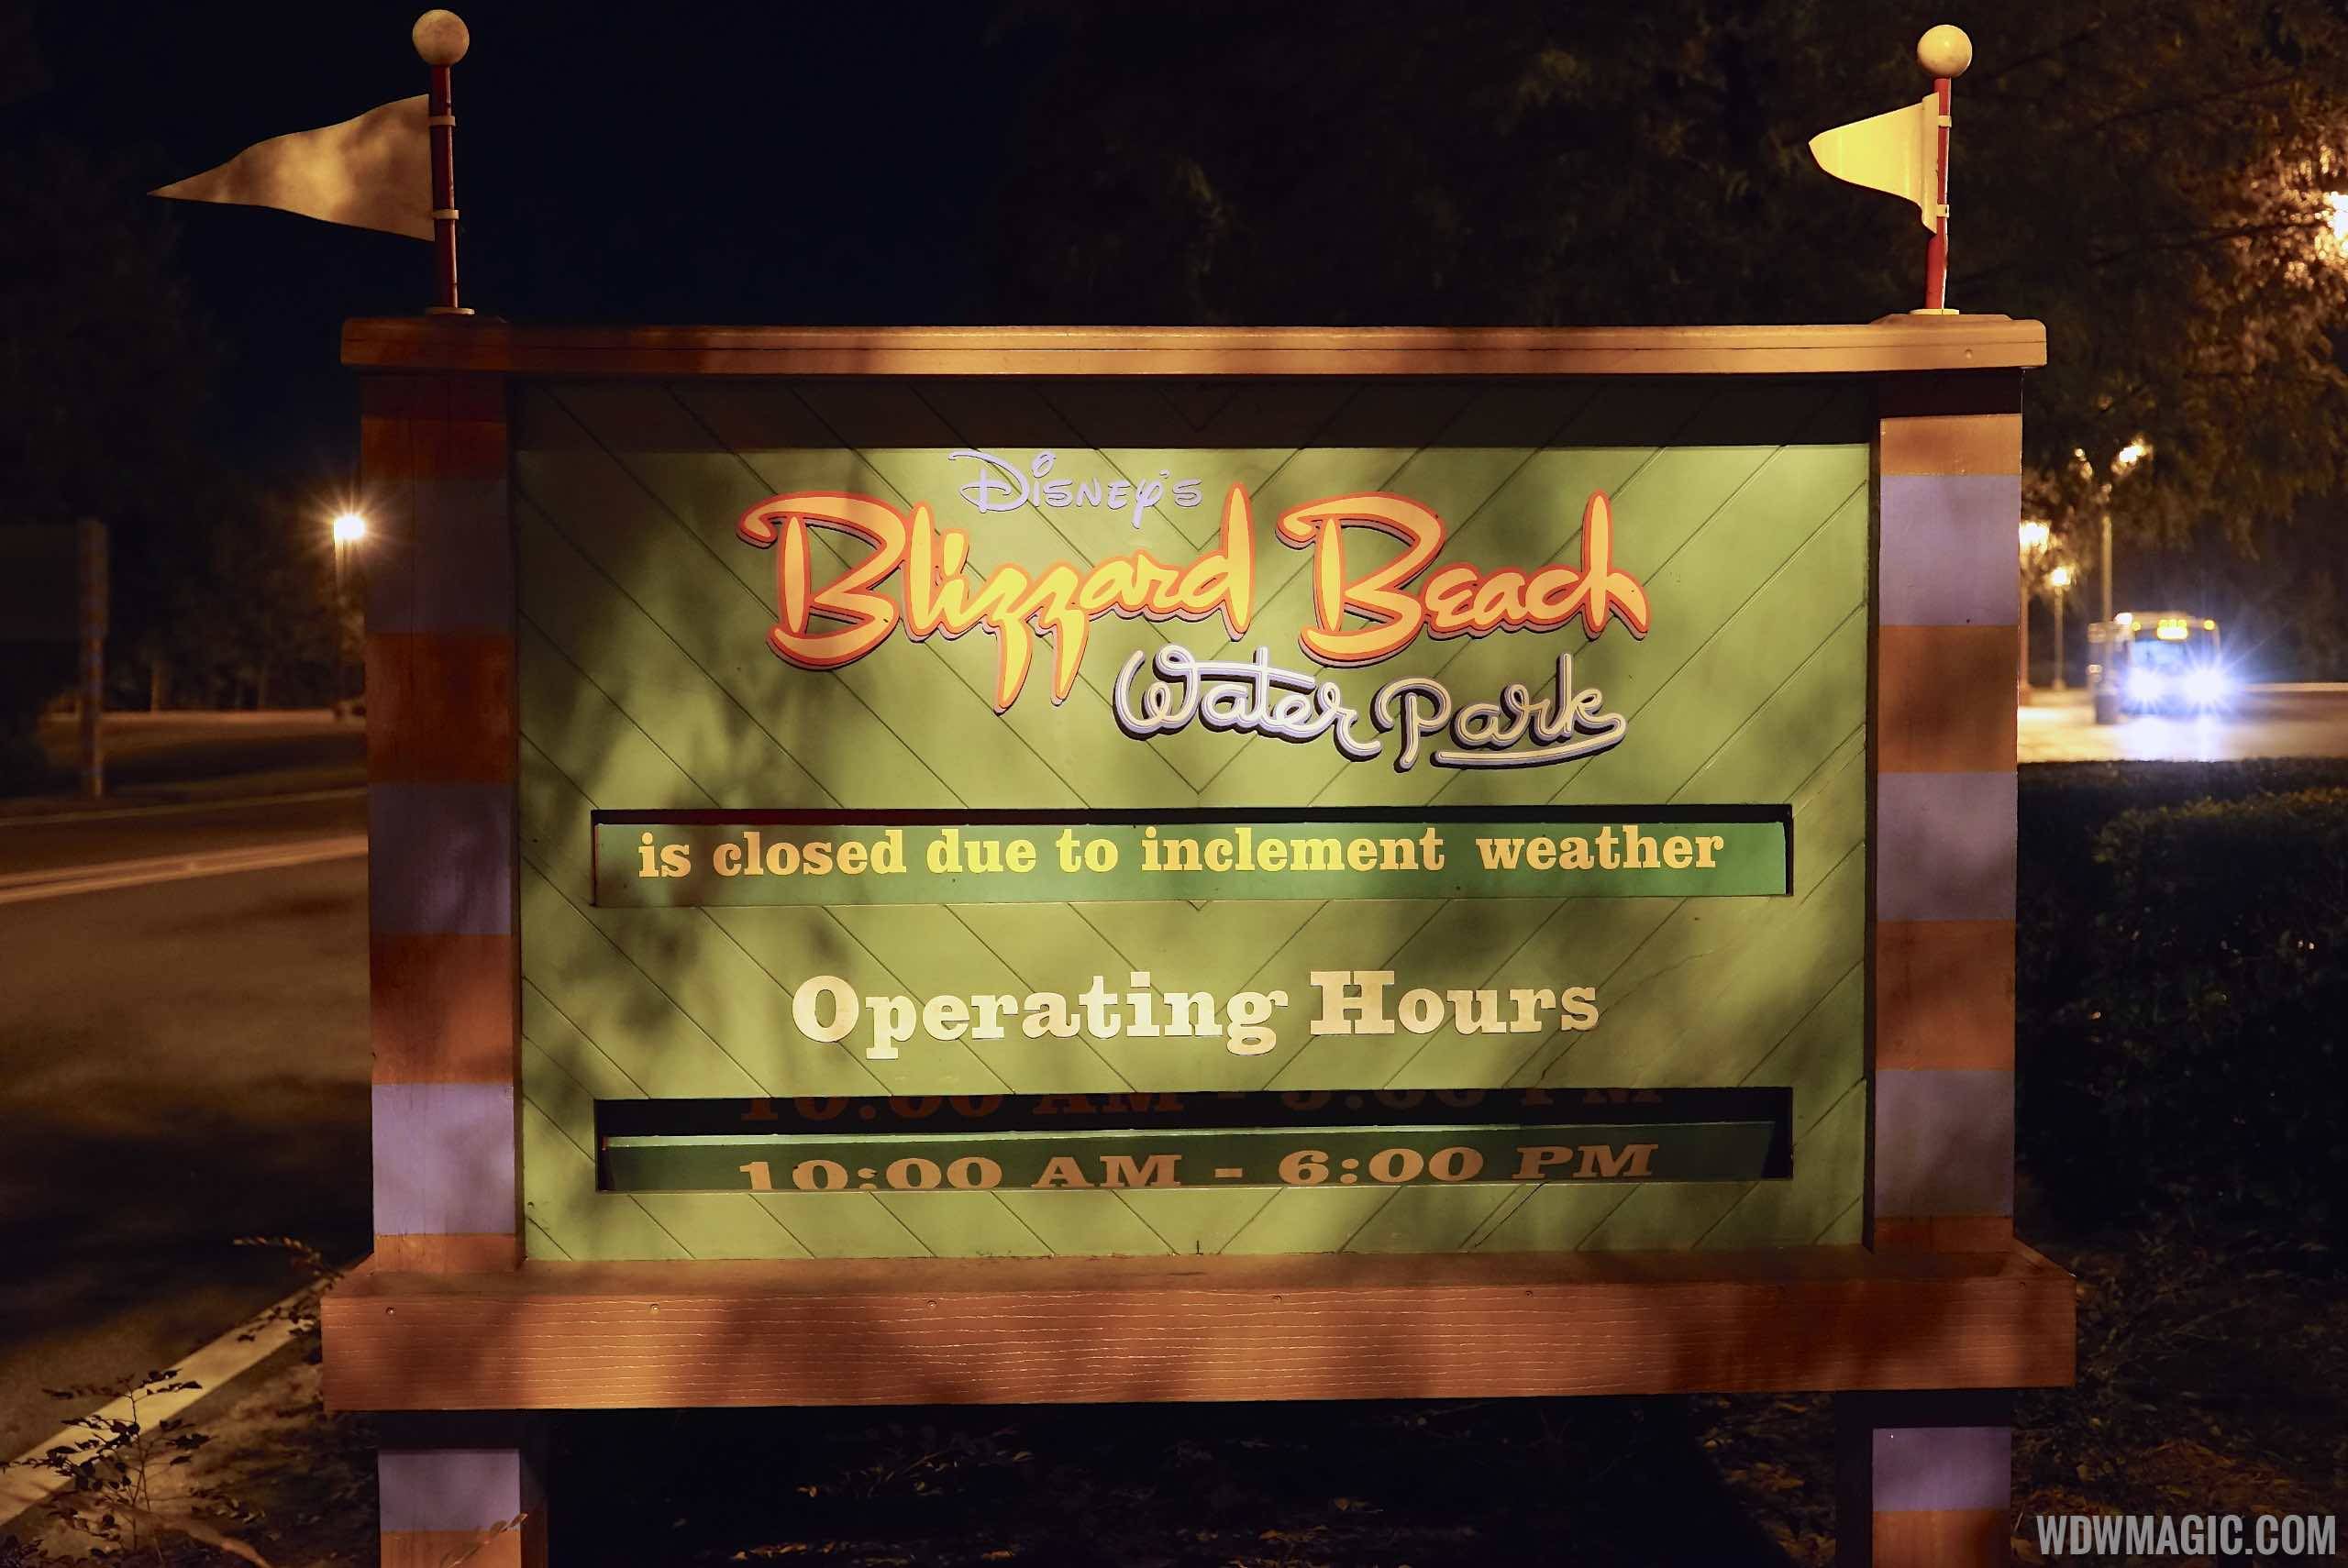 Blizzard Beach closed due to inclement weather